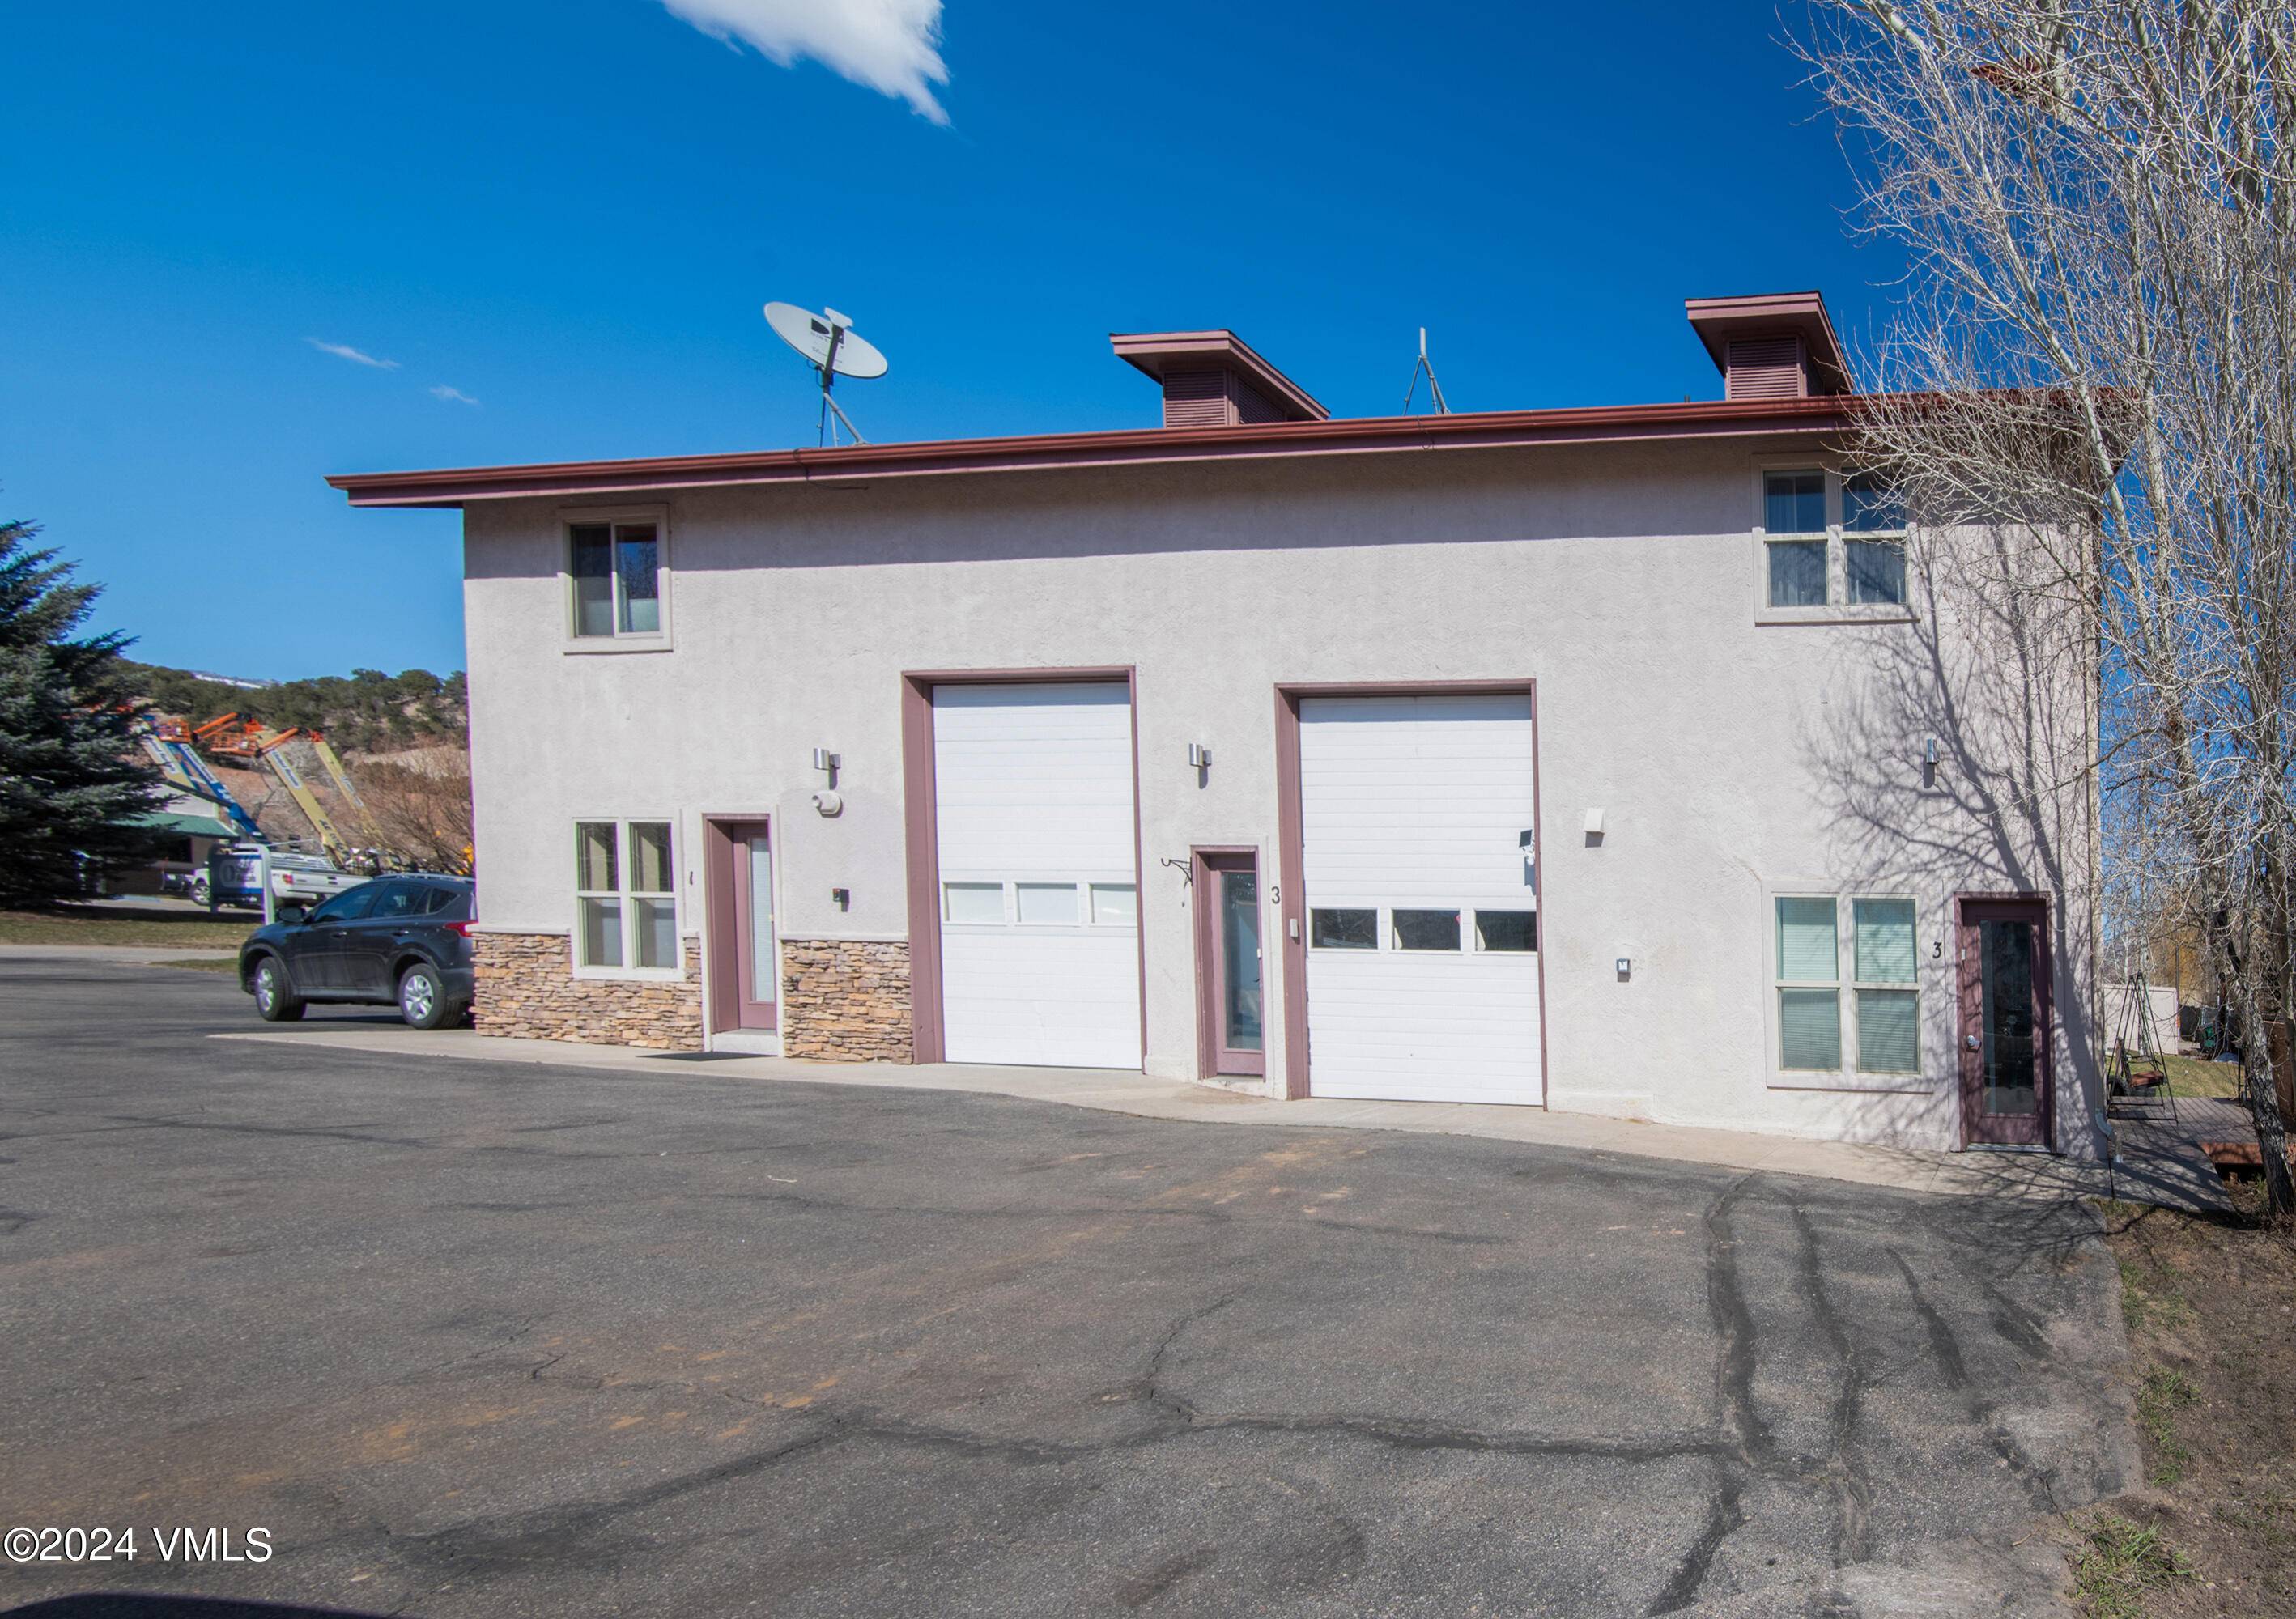 Commercial unit in Eagle perfect for a variety of business ventures with excellent visibility and accessibility ; surrounded by growing businesses and newer construction.